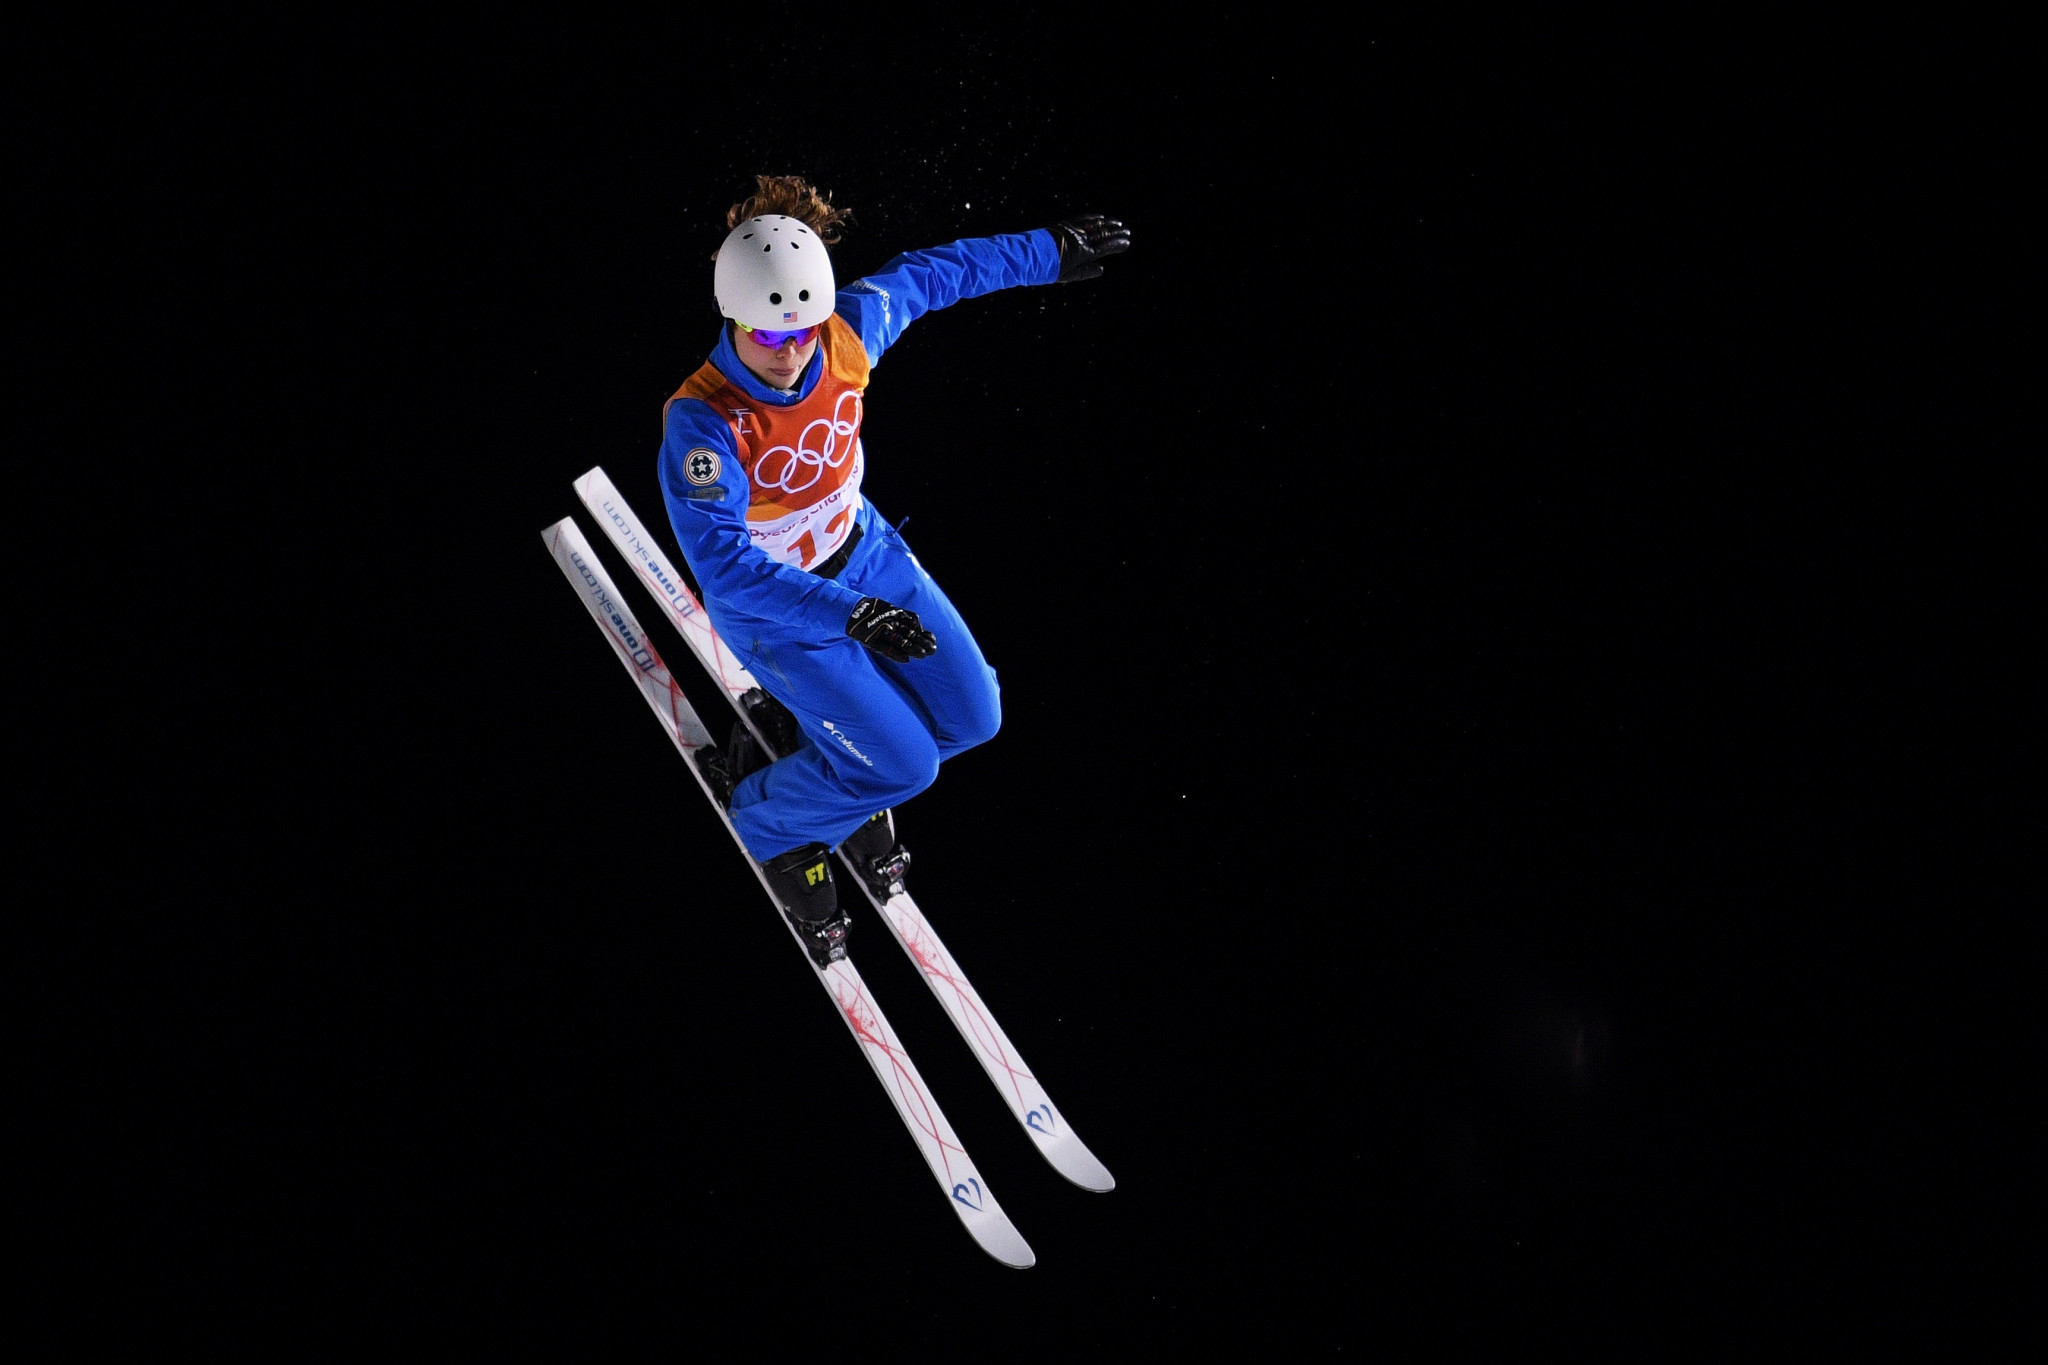 Ashley Caldwell will defend her world title on home snow ©Getty Images